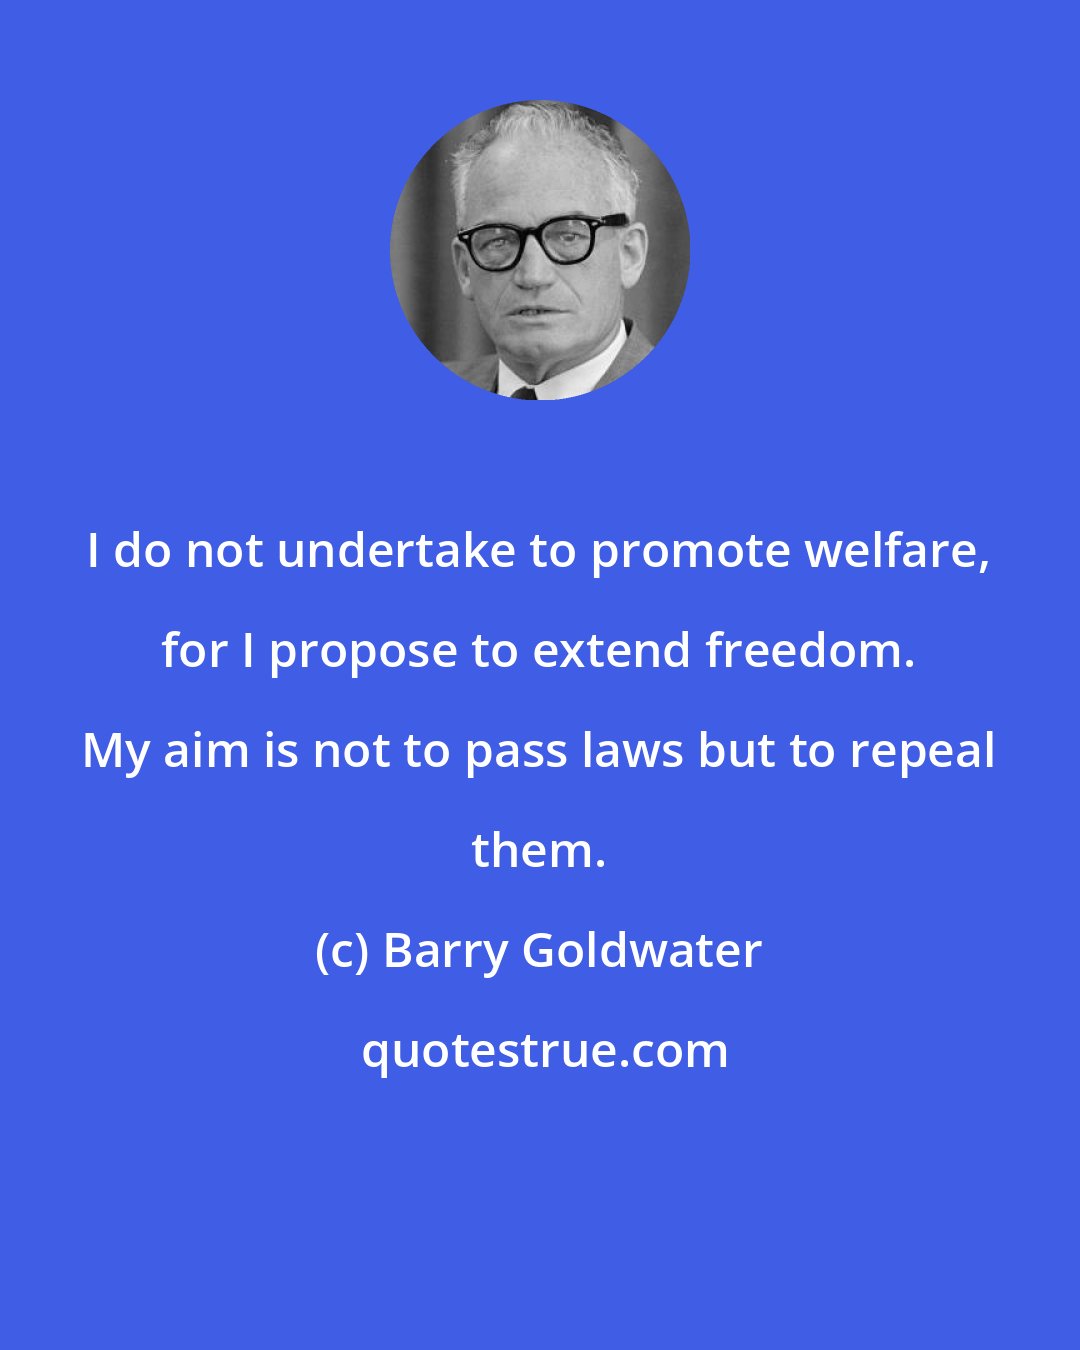 Barry Goldwater: I do not undertake to promote welfare, for I propose to extend freedom. My aim is not to pass laws but to repeal them.